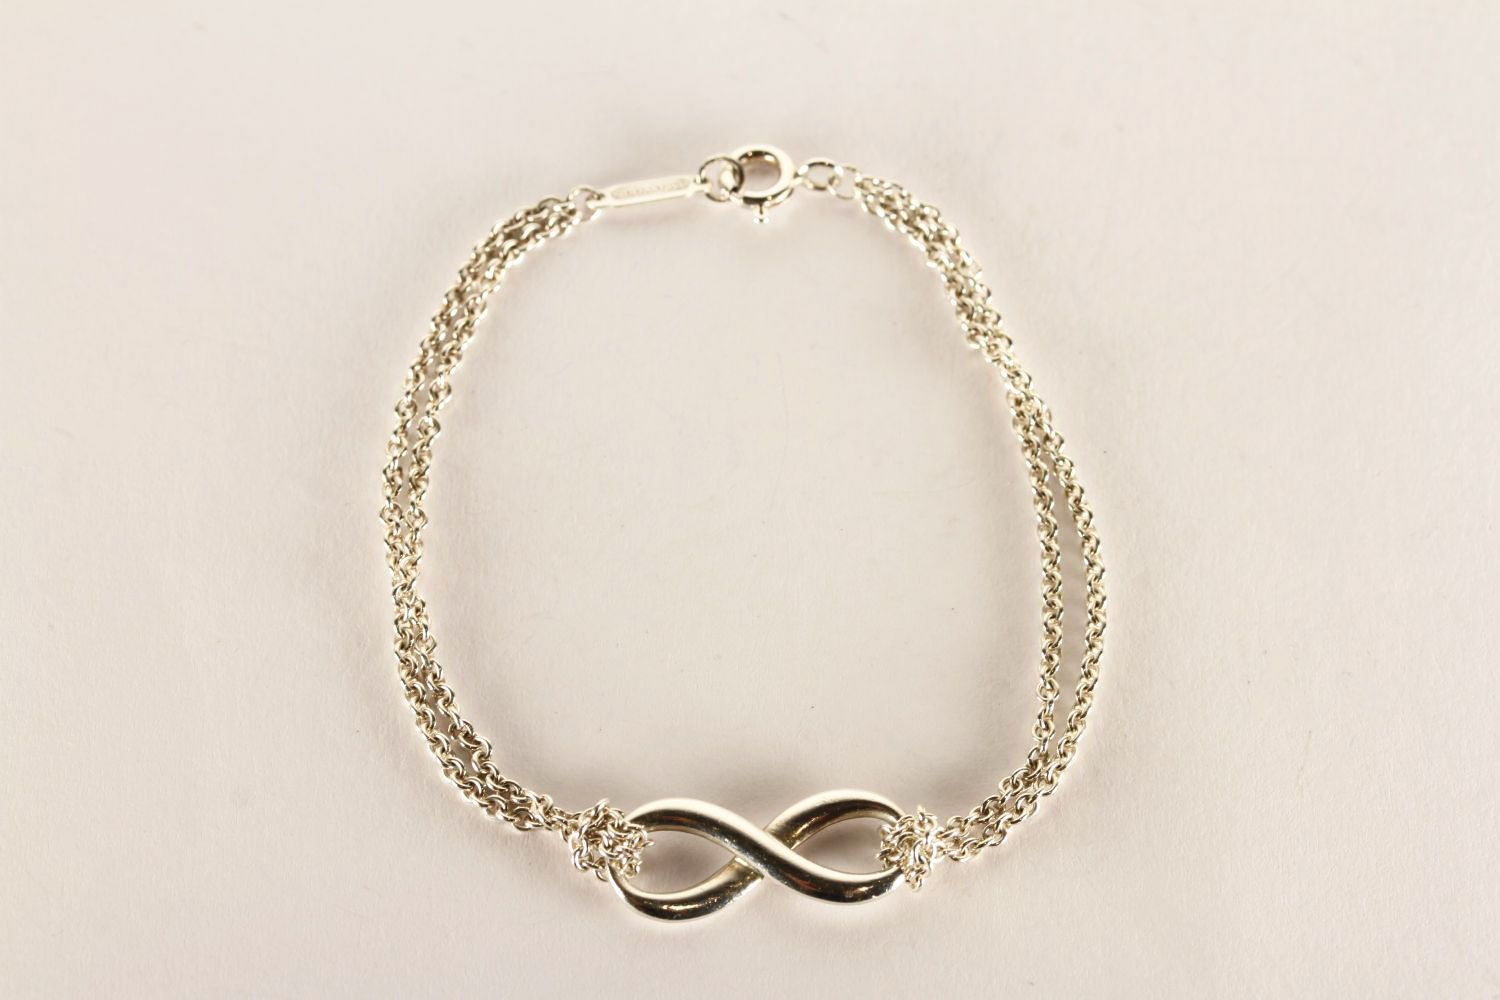 Tiffany & Co Infinity Bracelet, stamped sterling silver, approximate length 14.5cm, comes with a - Image 2 of 3